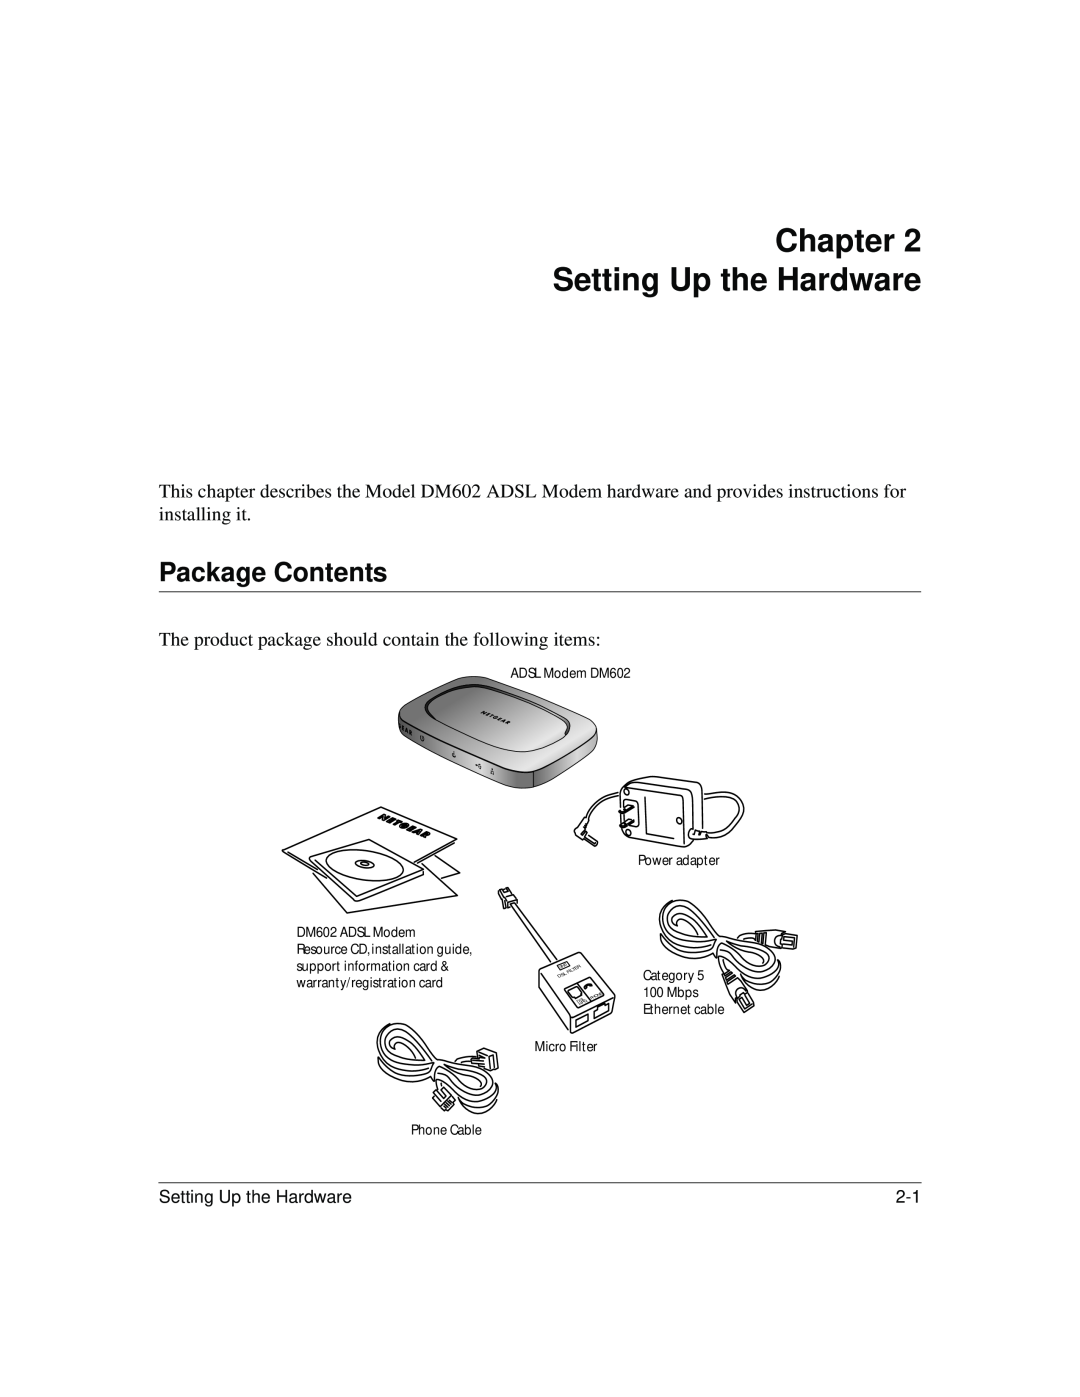 NETGEAR Chapter Setting Up the Hardware, Package Contents, ADSL Modem DM602 Power adapter, Category, Filter Dsl, Line 